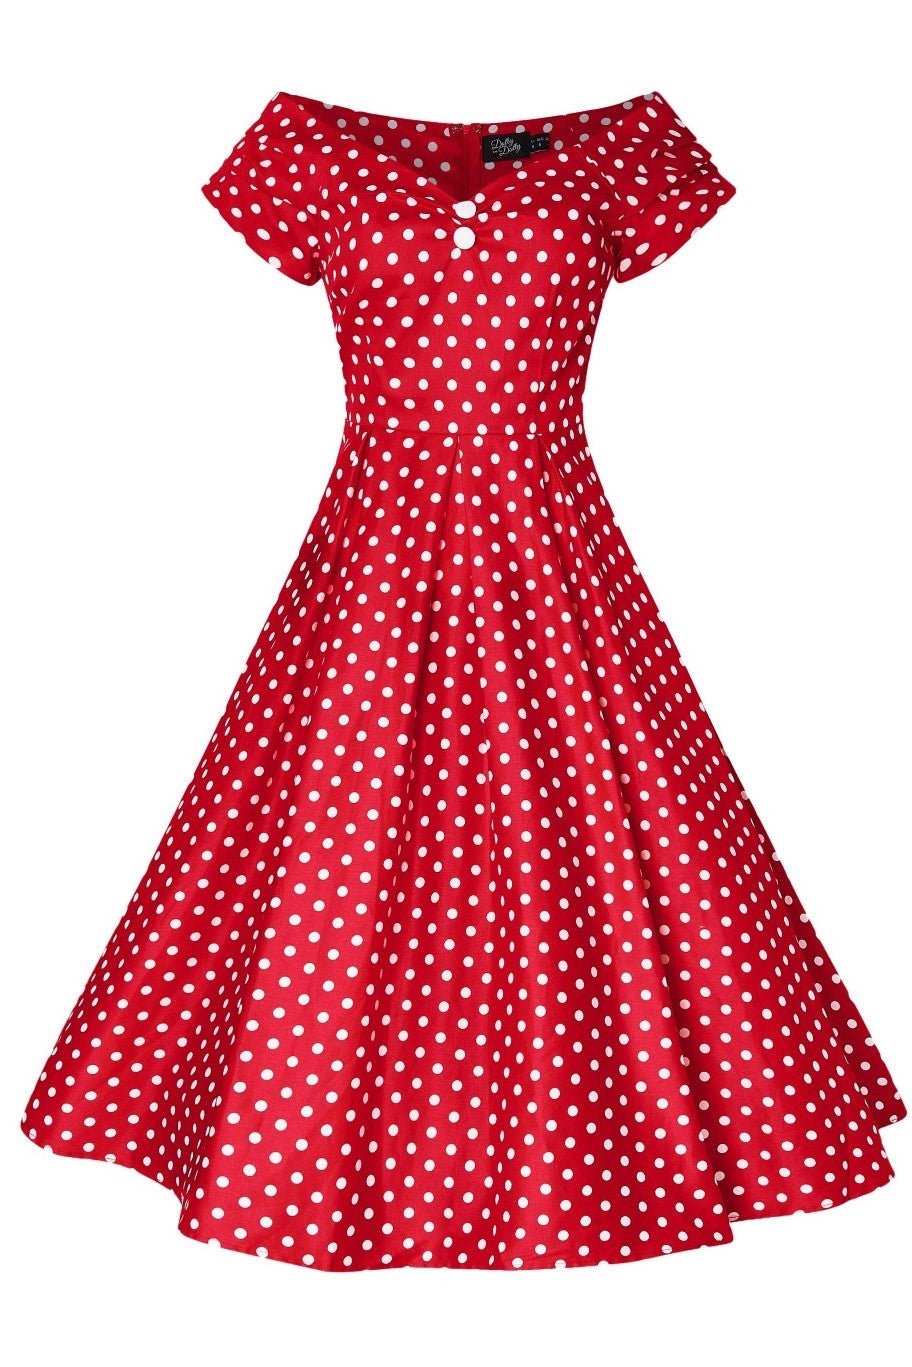 Lily Off-Shoulder 50's Polka Dot Swing Dress in Red/White